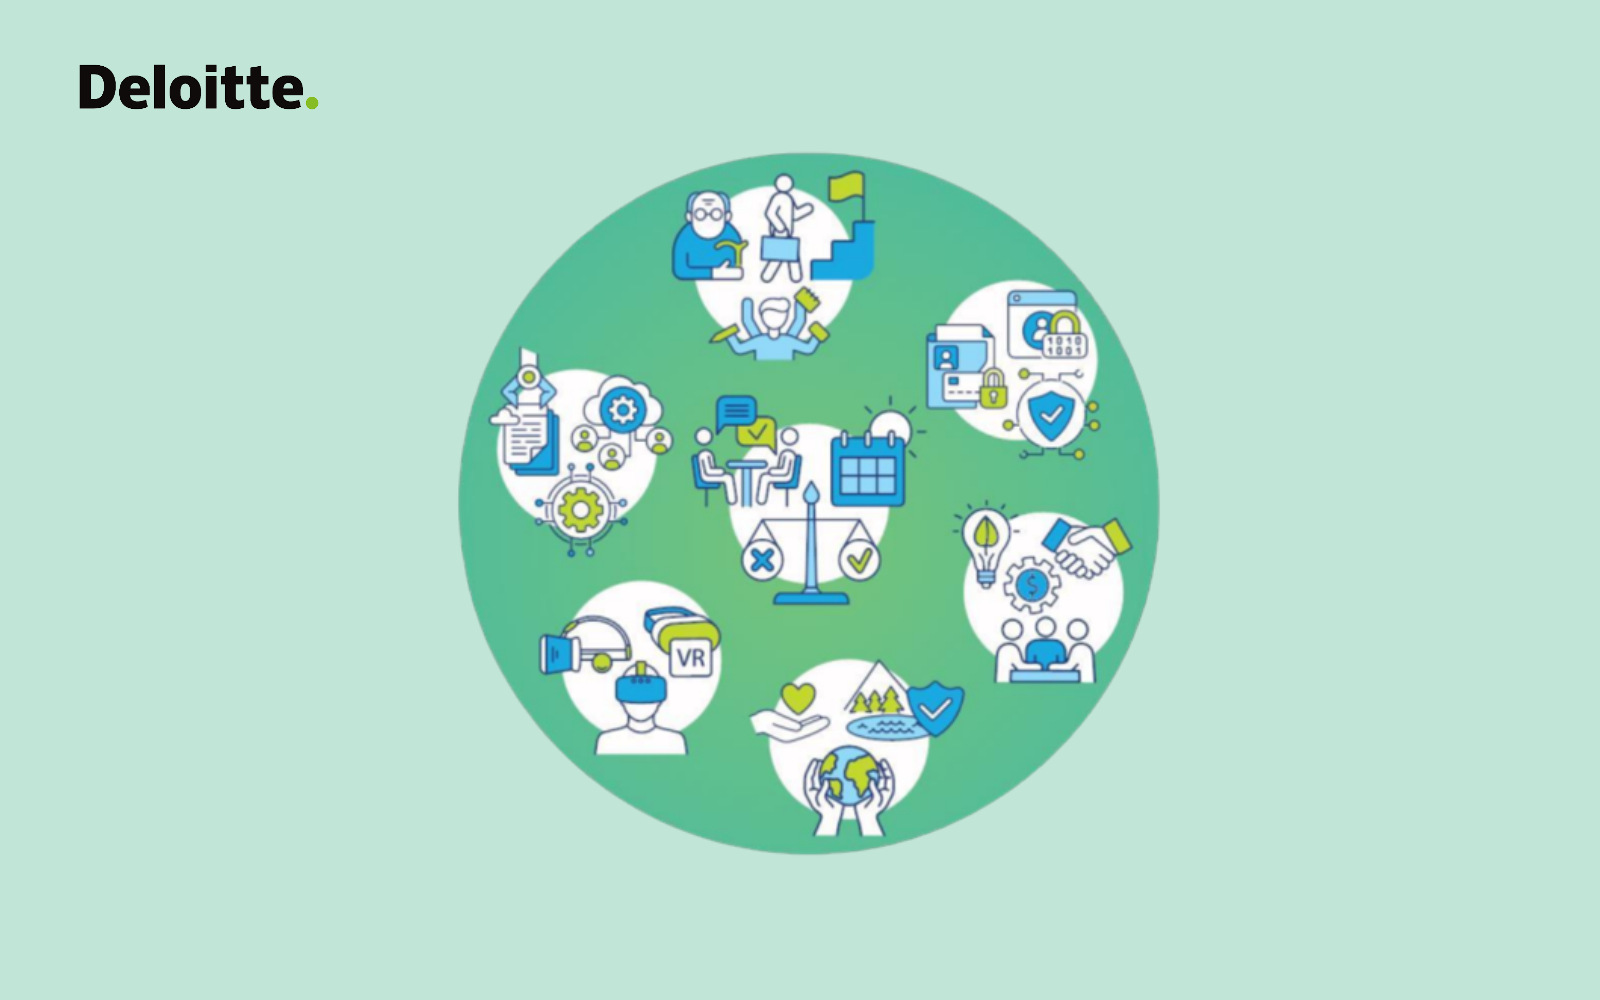 Deloitte “Towards 2030: 7 transformations that will reshape organizations in a decade of disruption”